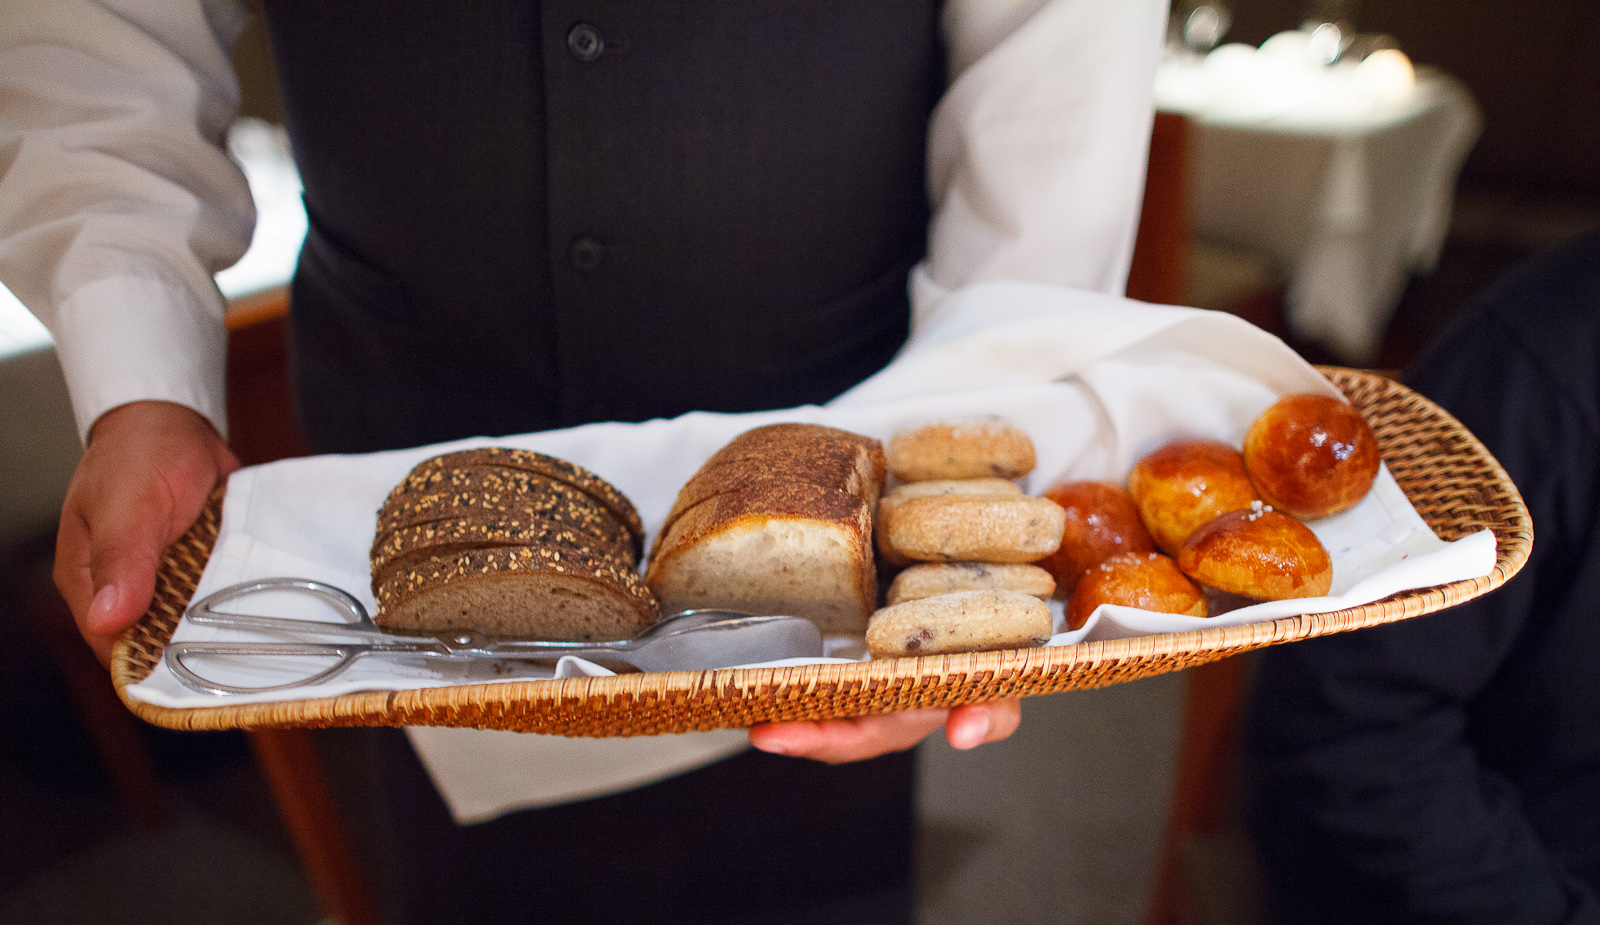 House-made breads